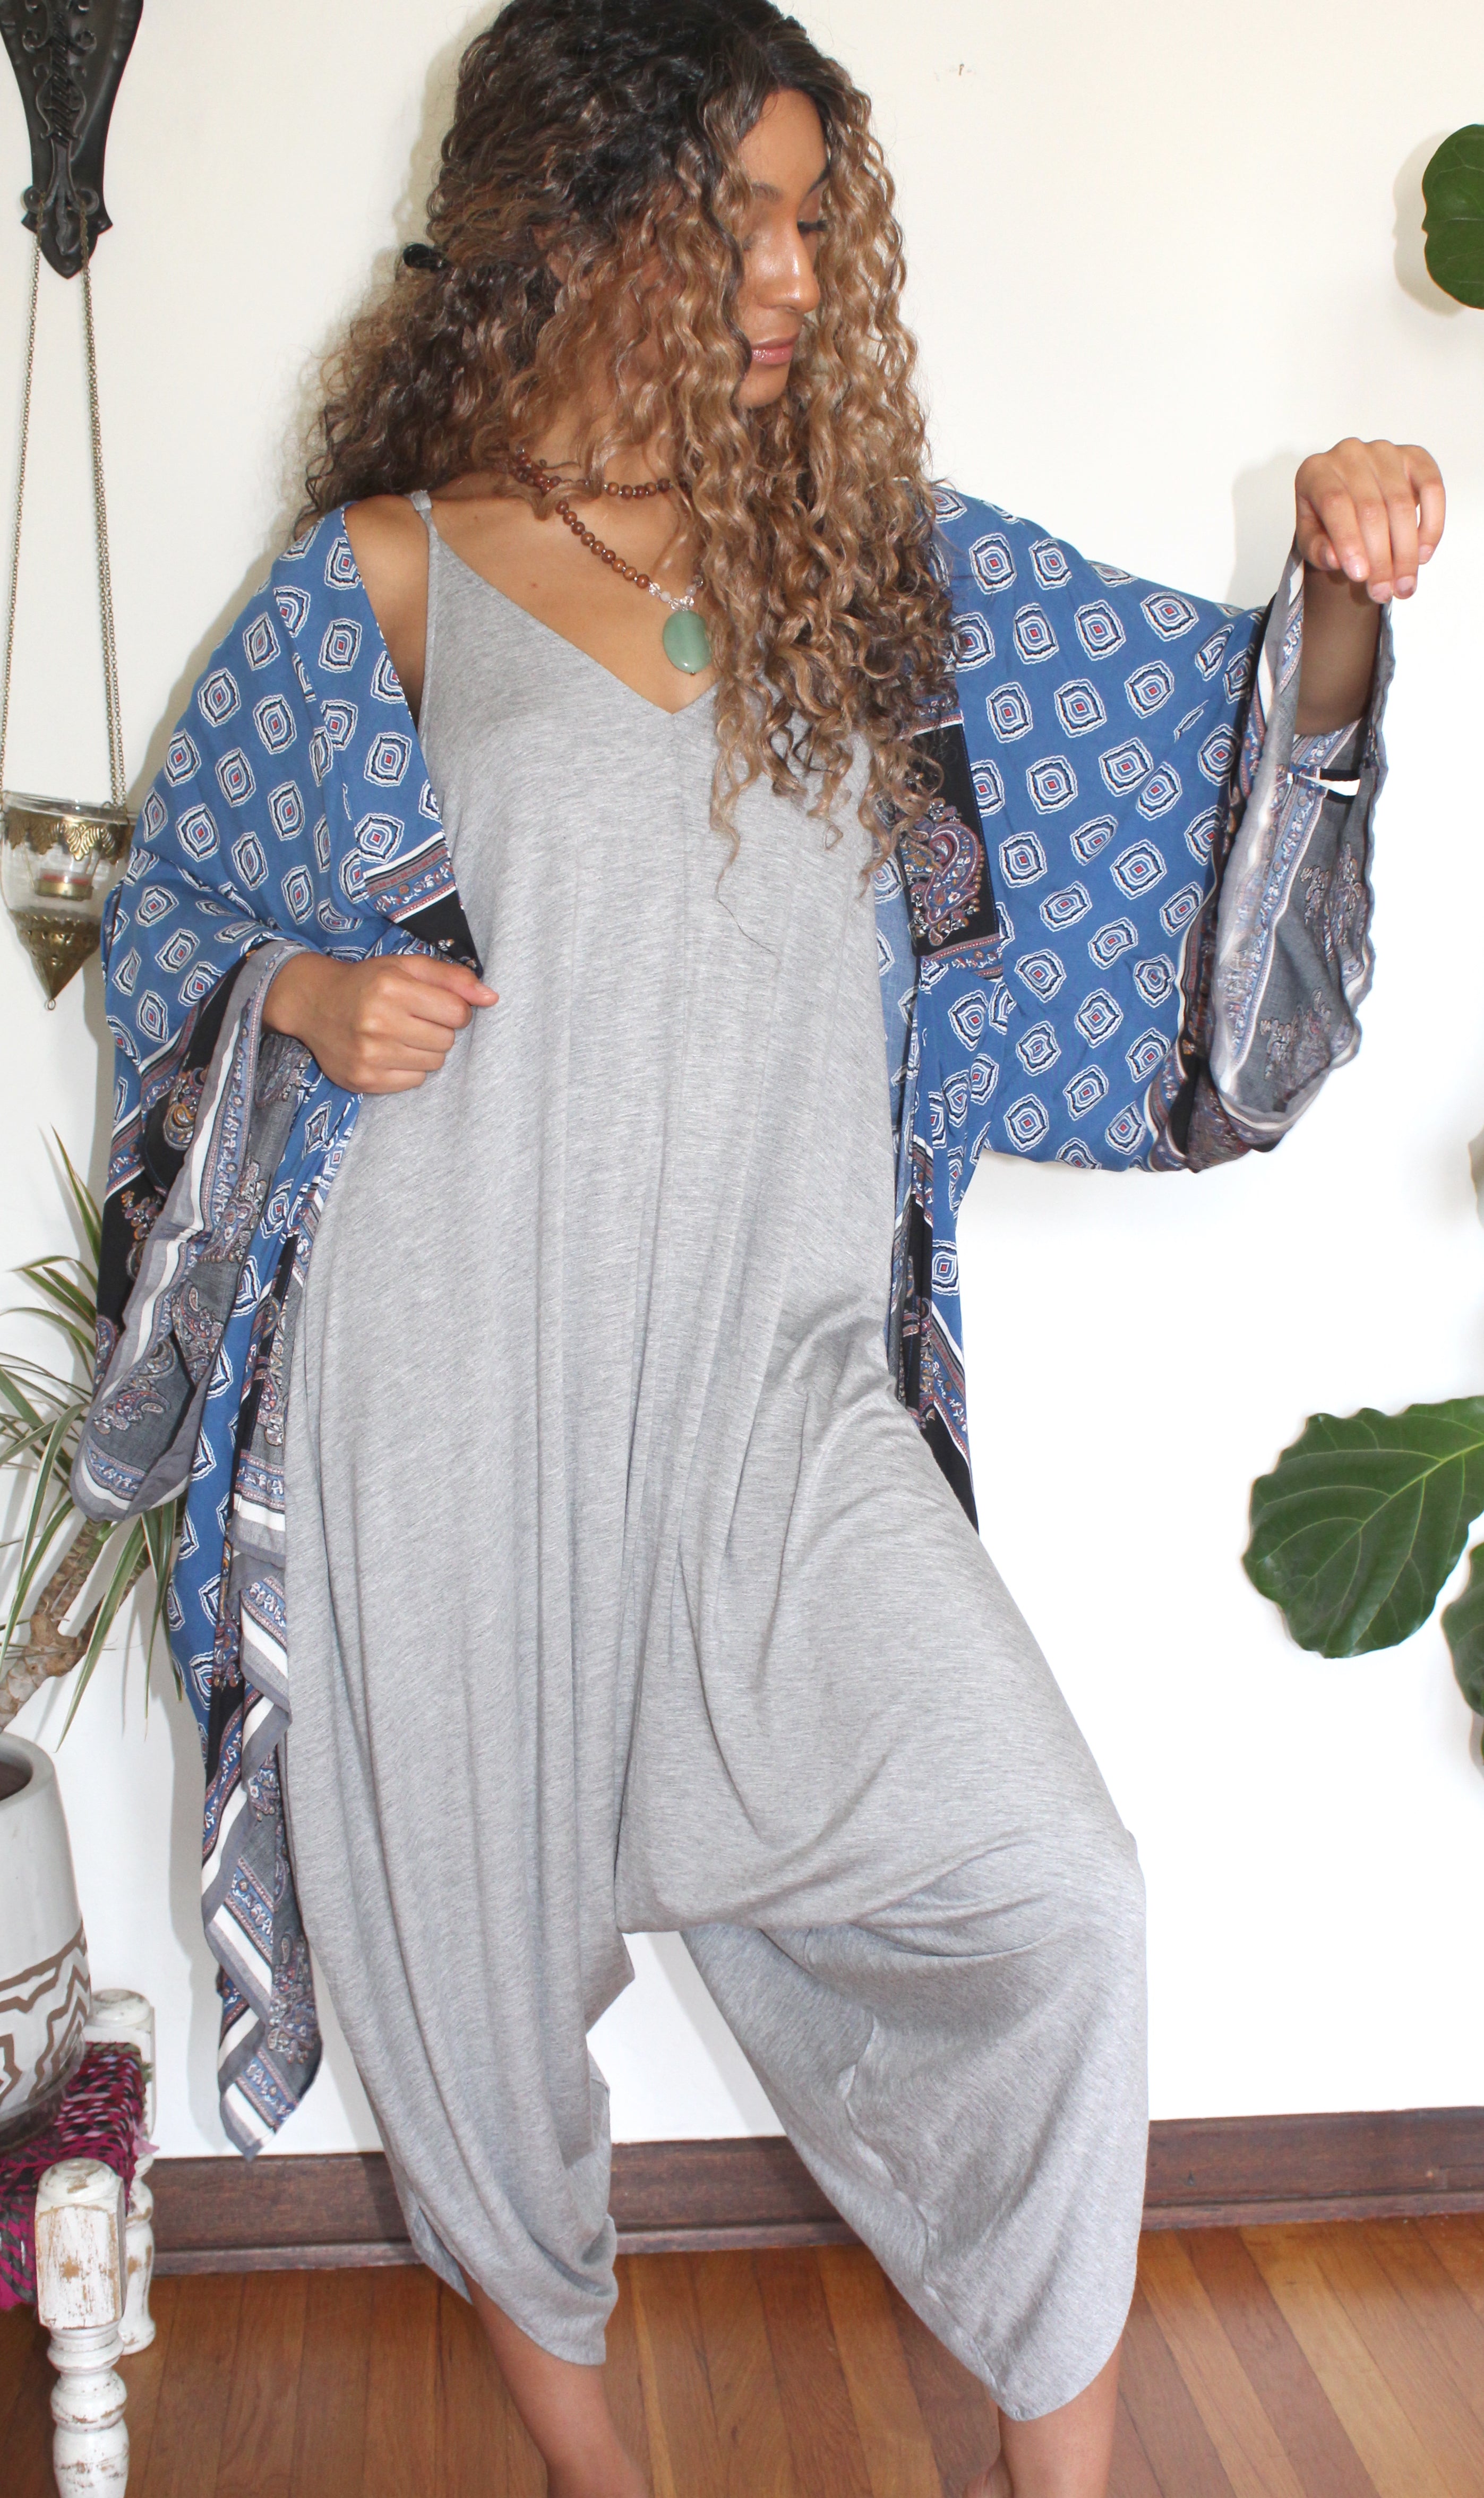 Komodo Dragon Kimono in Mulberry - Yoga Clothing by Daughters of Culture